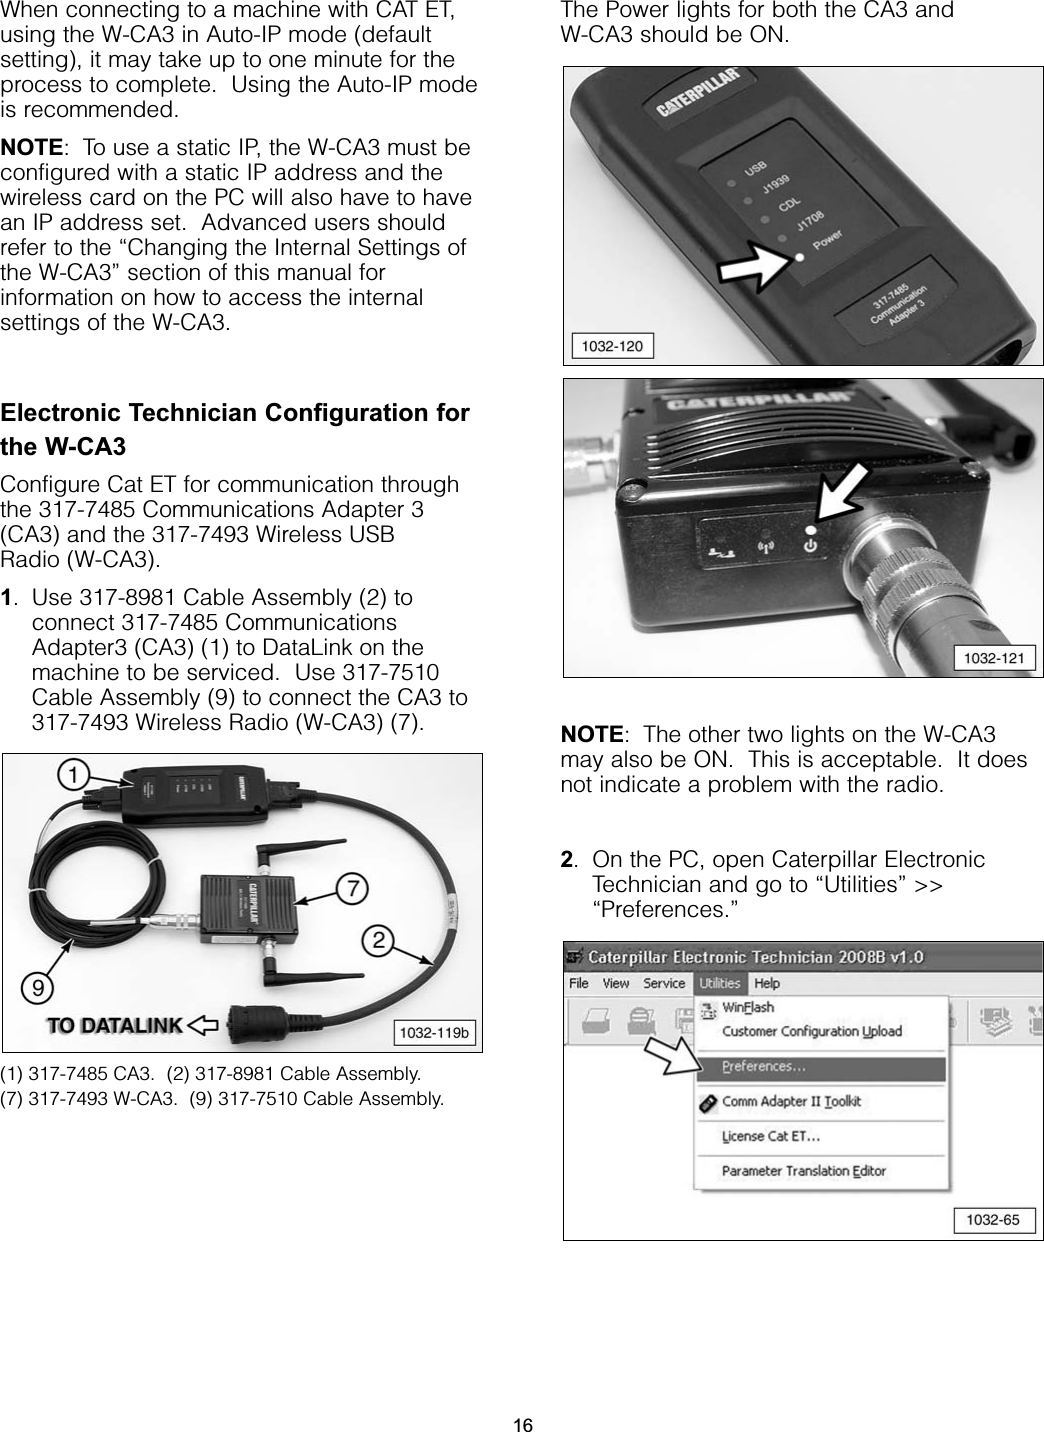 When connecting to a machine with CAT ET,using the W-CA3 in Auto-IP mode (defaultsetting), it may take up to one minute for theprocess to complete.  Using the Auto-IP modeis recommended.NOTE: To use a static IP, the W-CA3 must beconfigured with a static IP address and thewireless card on the PC will also have to havean IP address set.  Advanced users shouldrefer to the “Changing the Internal Settings ofthe W-CA3” section of this manual forinformation on how to access the internalsettings of the W-CA3.Electronic Technician Configuration forthe W-CA3Configure Cat ET for communication throughthe 317-7485 Communications Adapter 3(CA3) and the 317-7493 Wireless USB Radio (W-CA3).1. Use 317-8981 Cable Assembly (2) toconnect 317-7485 CommunicationsAdapter3 (CA3) (1) to DataLink on themachine to be serviced.  Use 317-7510Cable Assembly (9) to connect the CA3 to317-7493 Wireless Radio (W-CA3) (7).(1) 317-7485 CA3.  (2) 317-8981 Cable Assembly.(7) 317-7493 W-CA3.  (9) 317-7510 Cable Assembly.The Power lights for both the CA3 and W-CA3 should be ON.NOTE: The other two lights on the W-CA3may also be ON.  This is acceptable.  It doesnot indicate a problem with the radio.2. On the PC, open Caterpillar ElectronicTechnician and go to “Utilities” &gt;&gt;“Preferences.”16